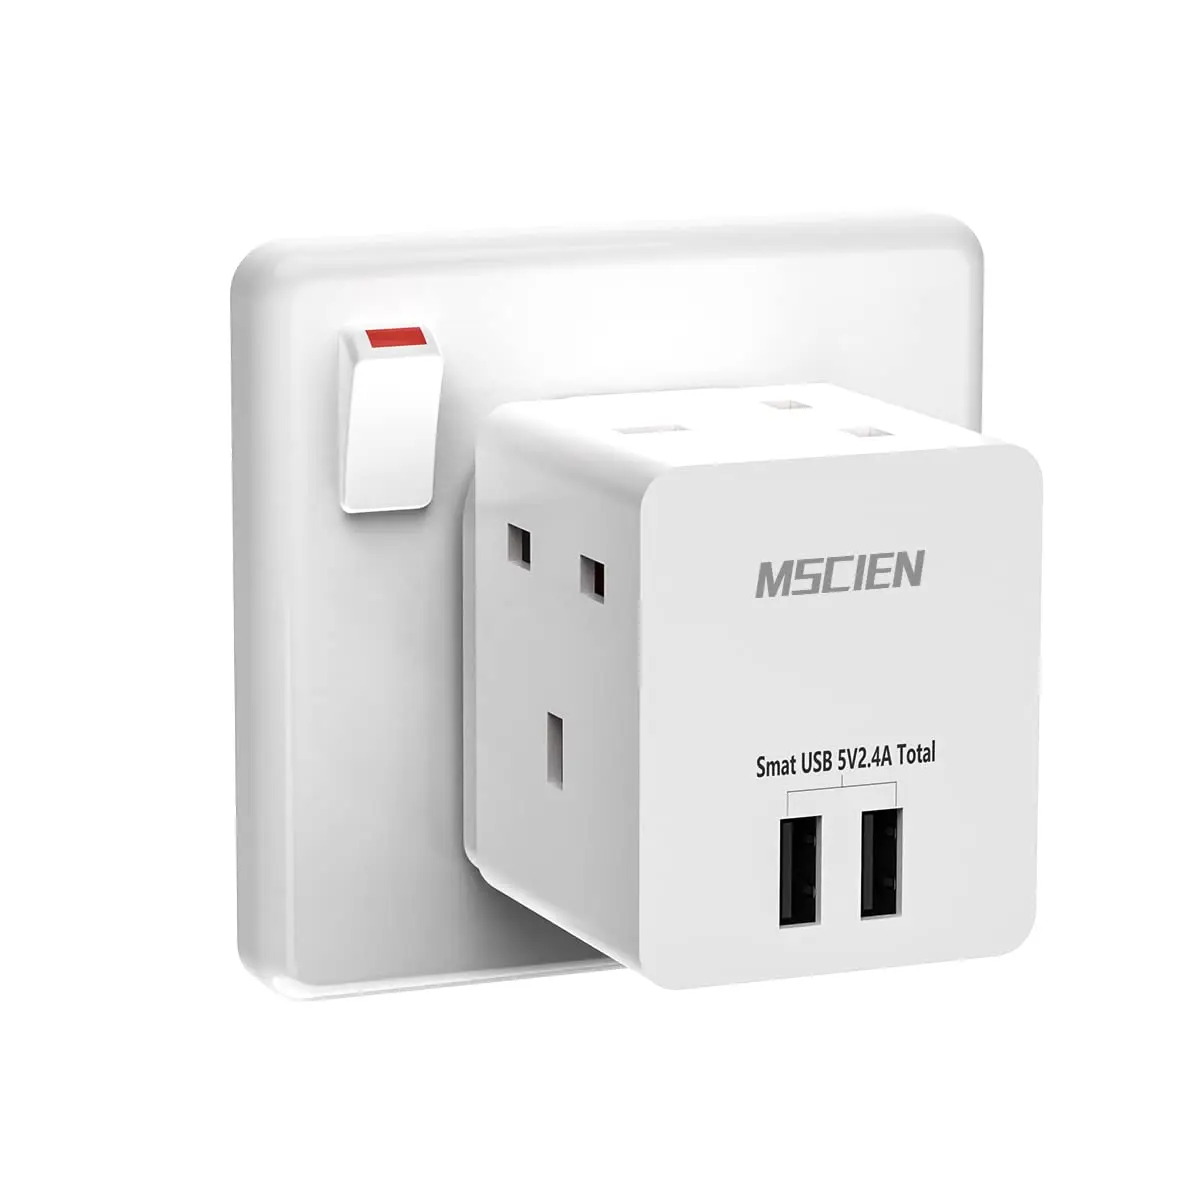 

MSCIEN UK Wall Socket Adapter with USB, Mini Cube Multi Plug Extension 3 AC Outlets with 2 USB Ports for Travel Home and Office